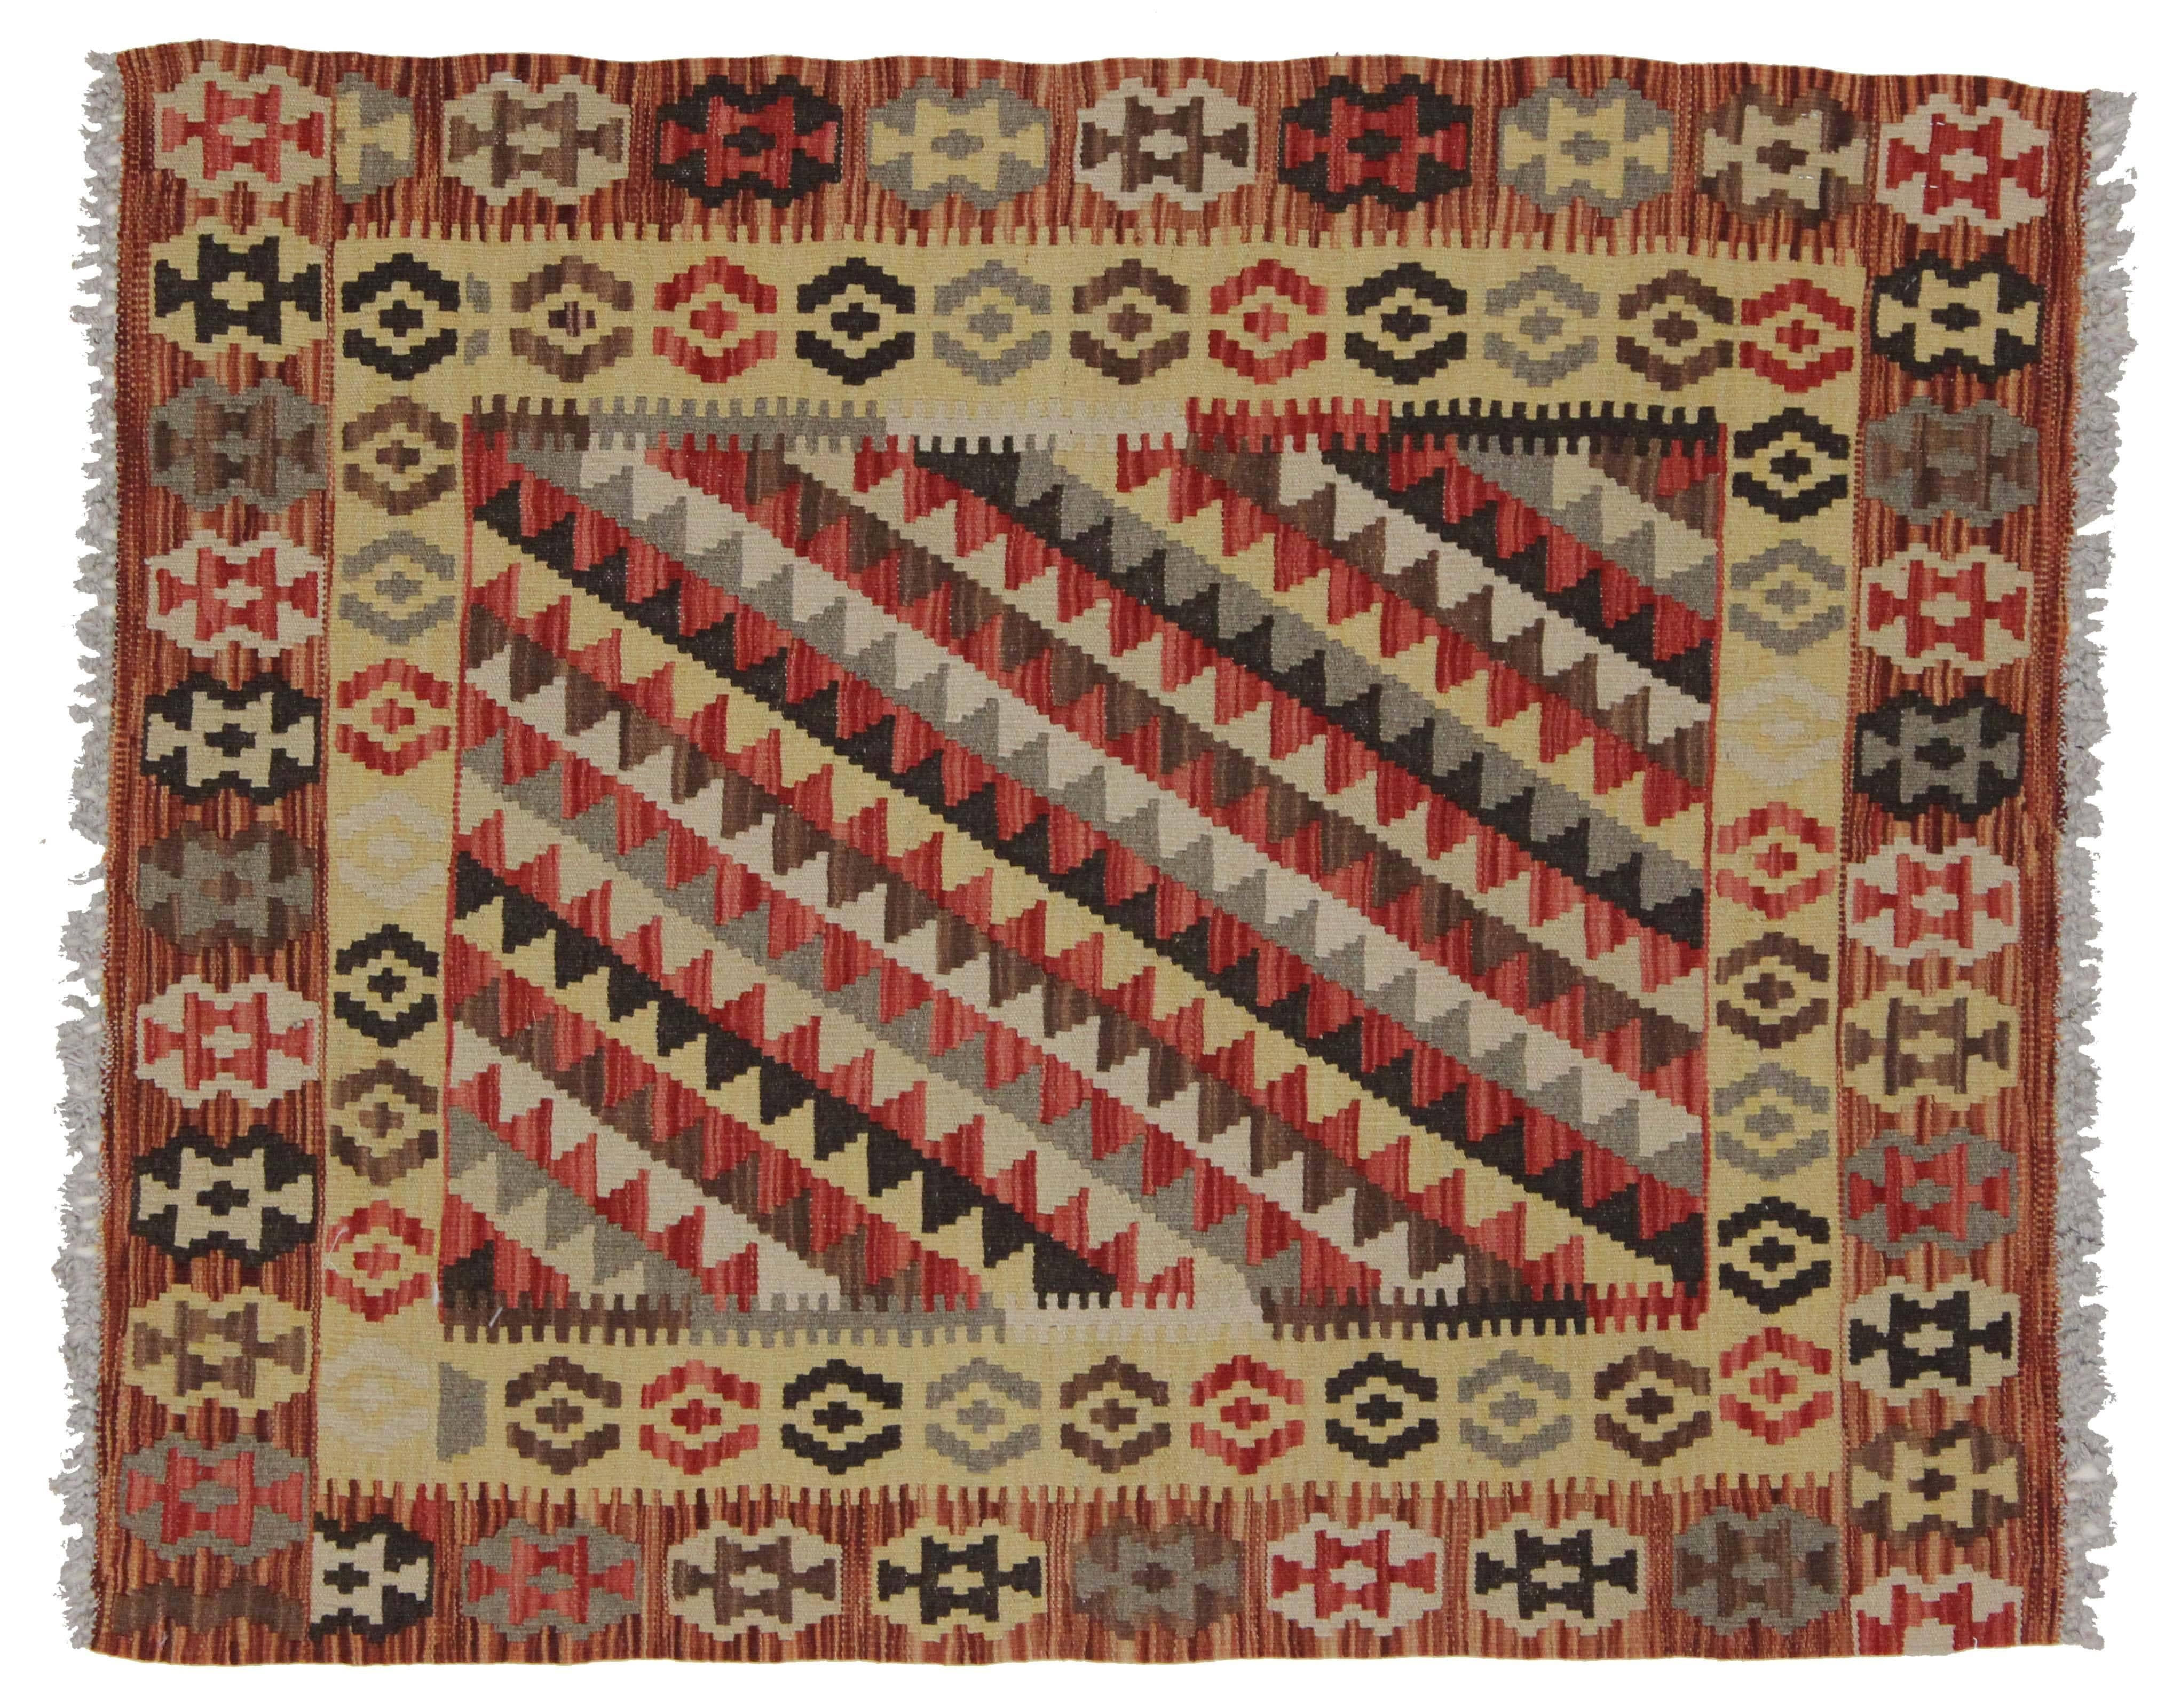 80133, a boho chic vintage Afghani Shirvan kilim rug with tribal style. This handwoven wool vintage Shirvan kilim rug features a central field of inverted triangles in a jeweled palette, diagonal lines create an eye-catching visual. The compound